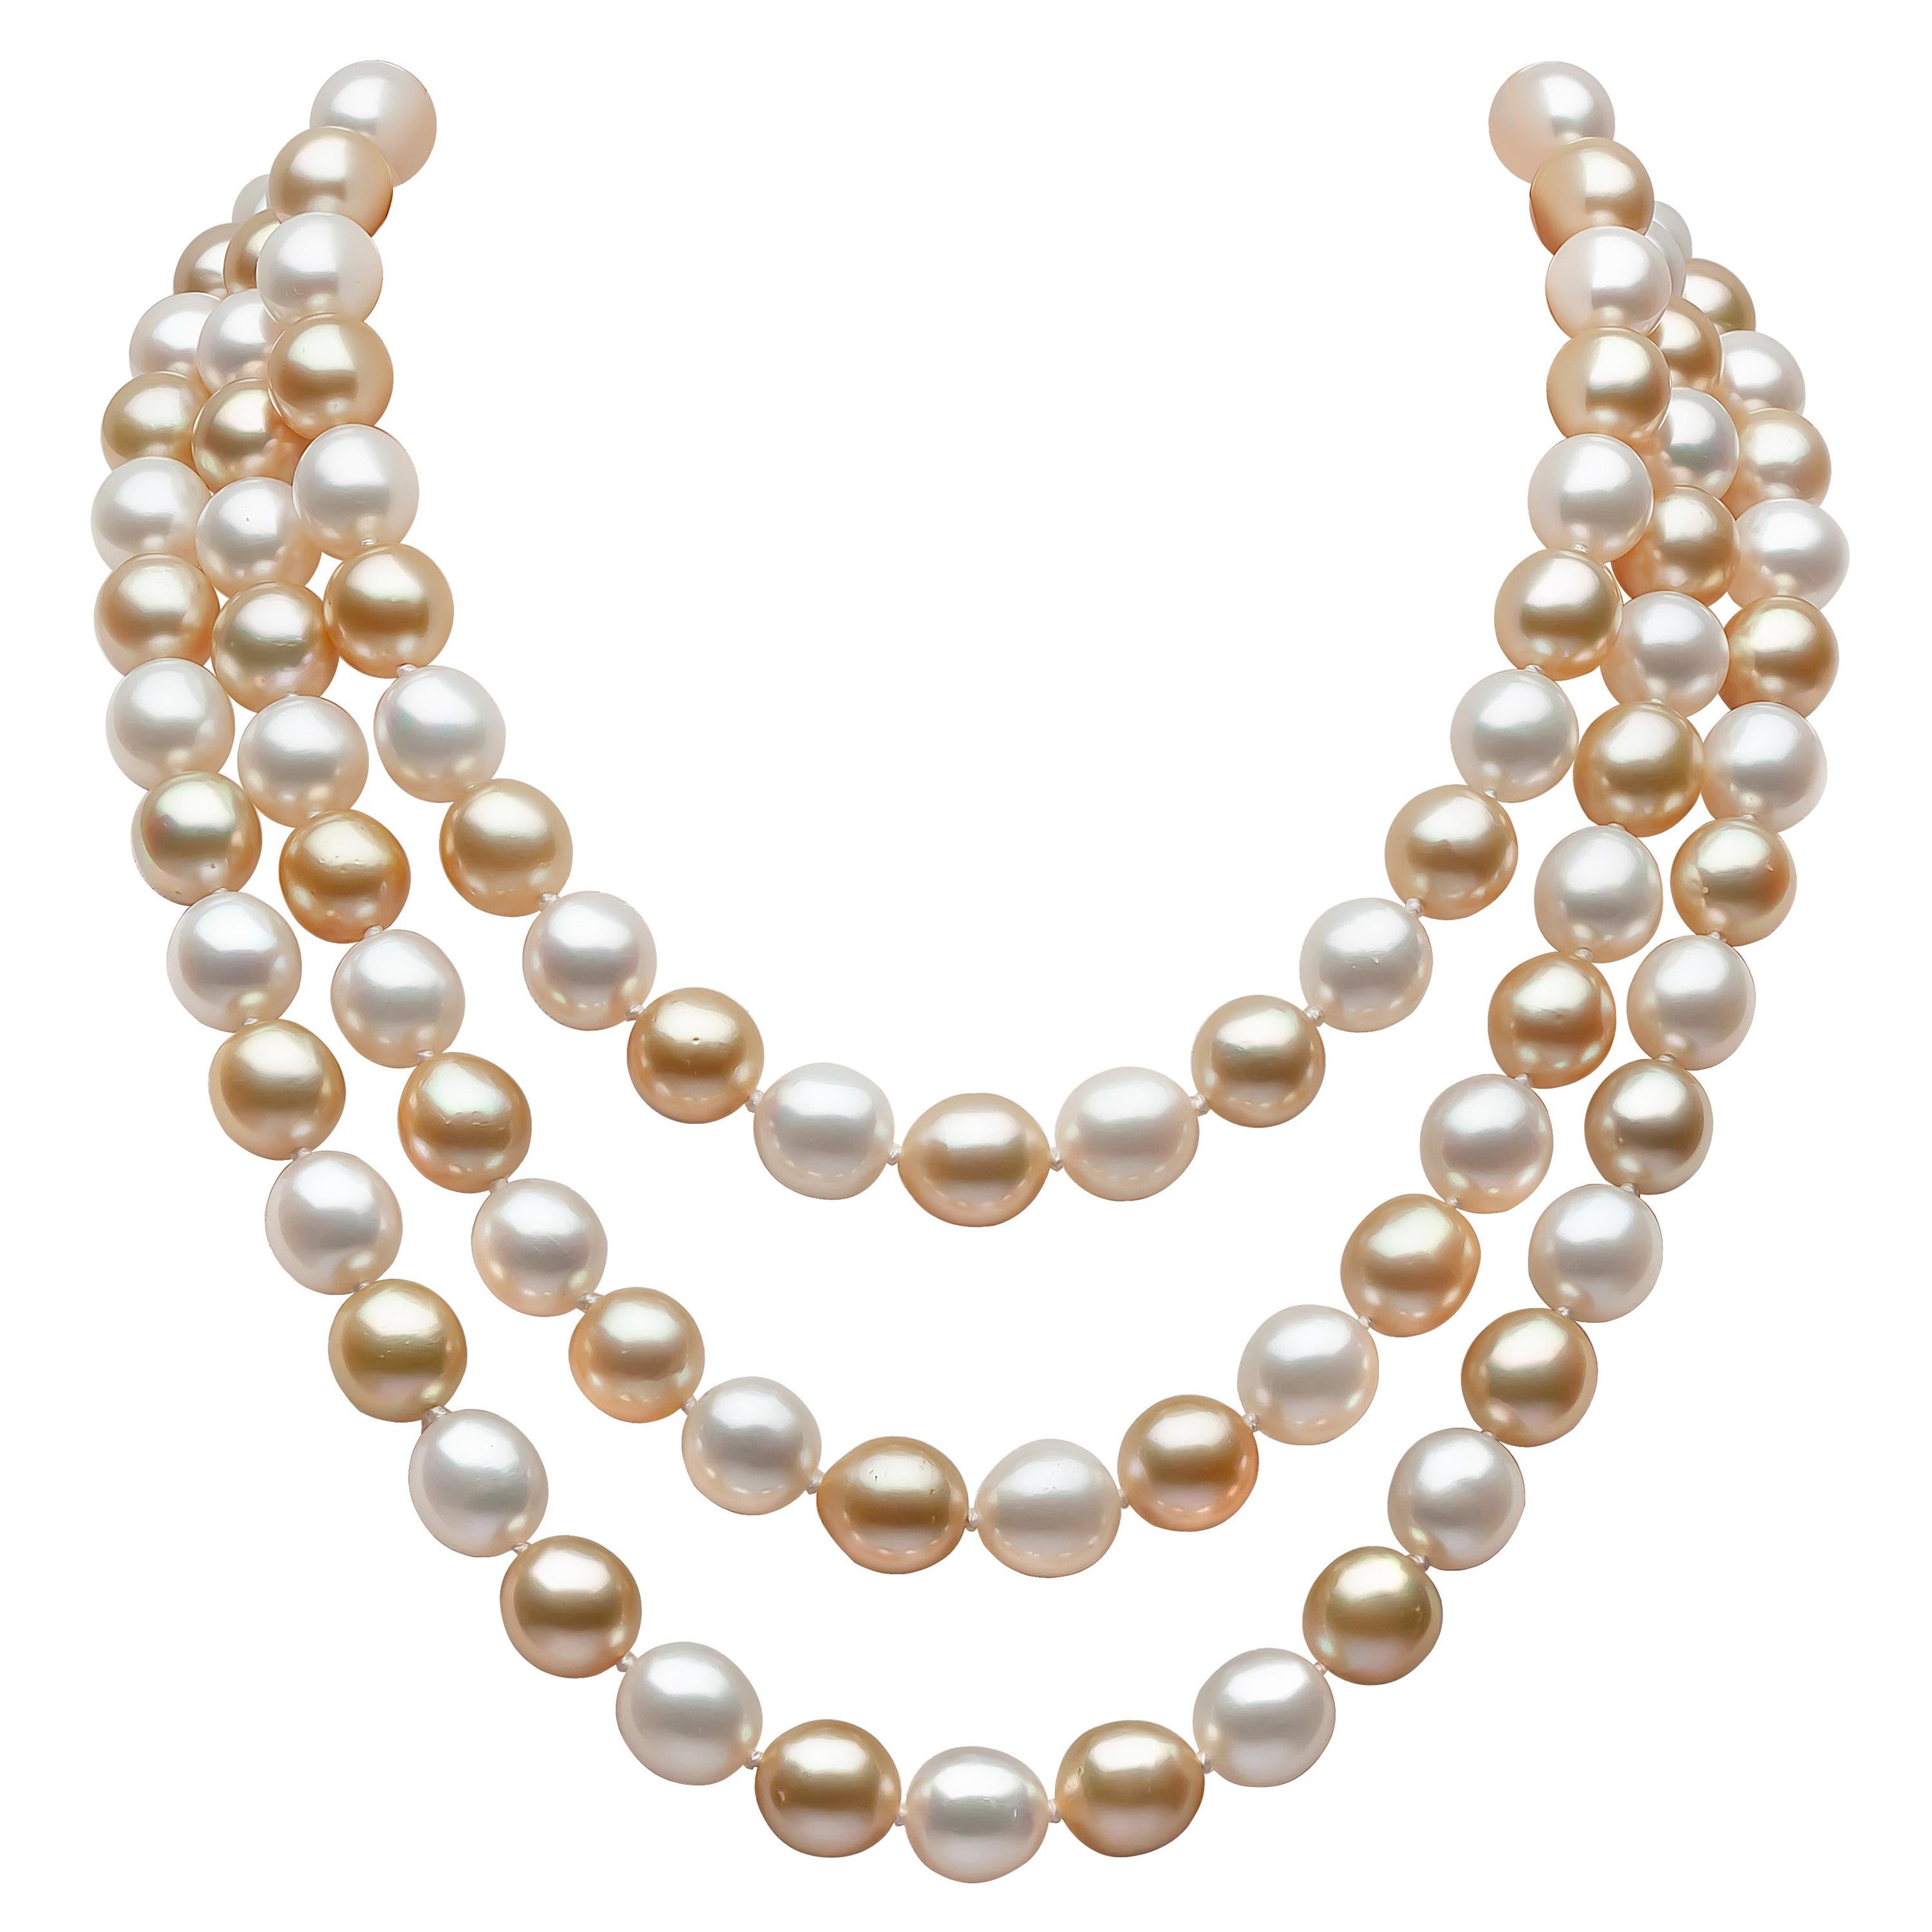 Yoko London Golden South Sea and Pearl Necklace in 18 Karat Yellow Gold